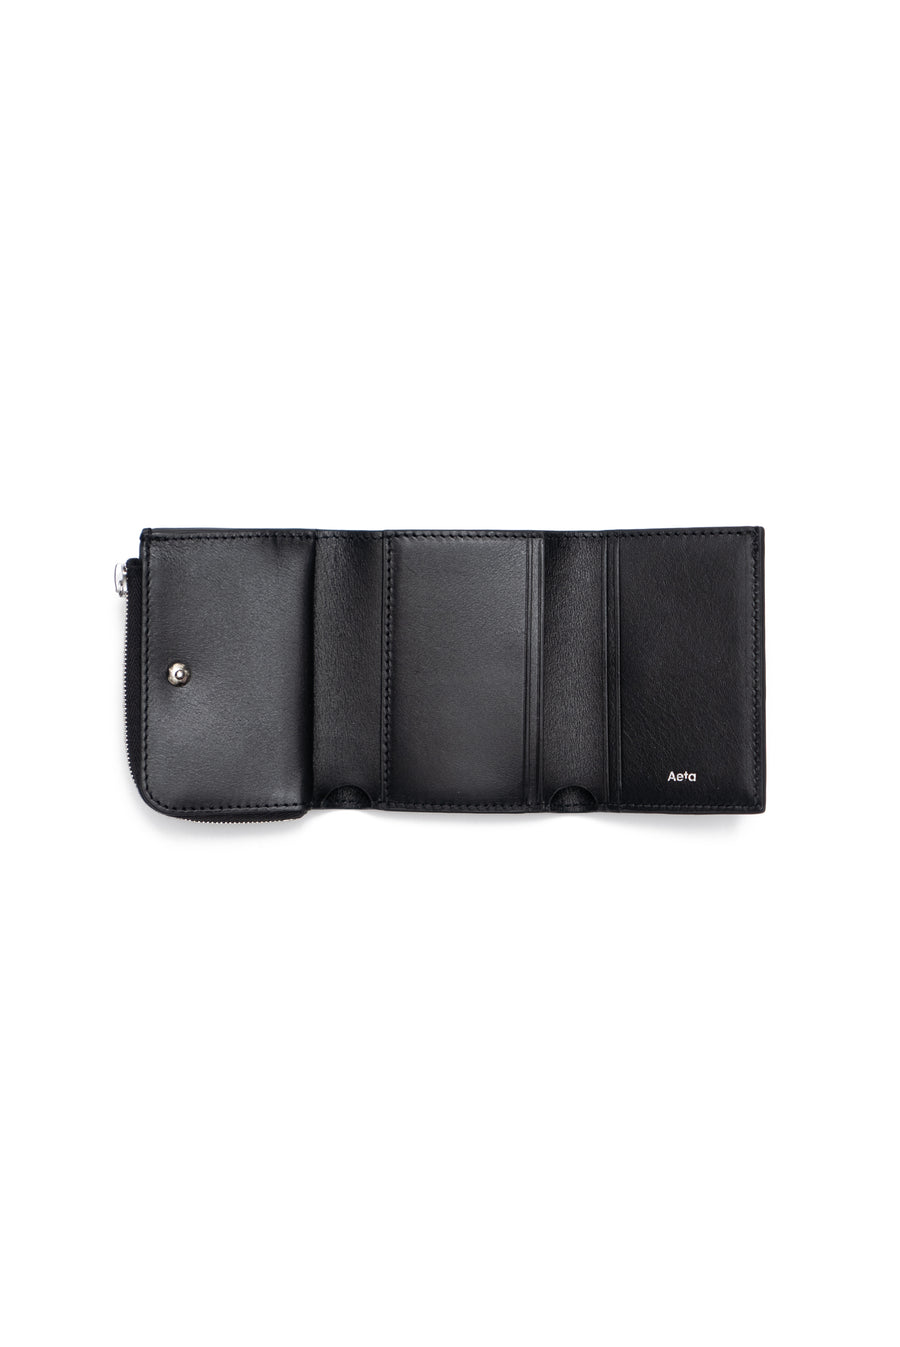 Aeta WALLET TYPE A MINI Exclusive item for Graphpaper